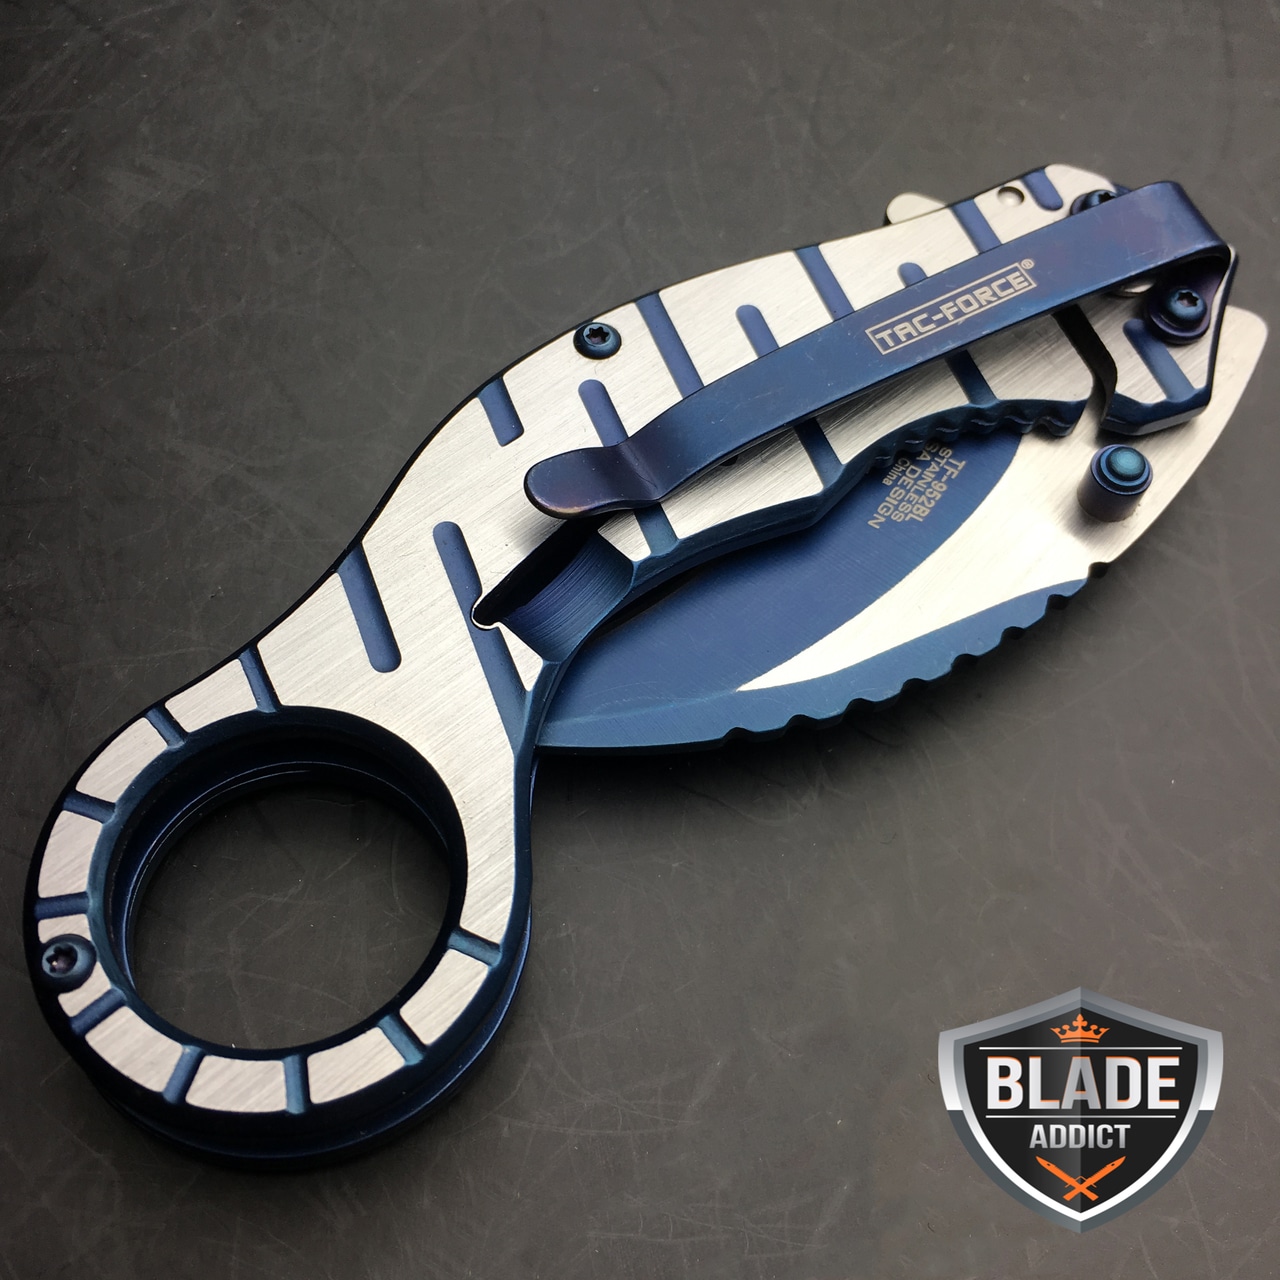 6.5" TAC FORCE Tactical Spring Assisted Open Karambit Pocket Knife CLAW BLUE EDC